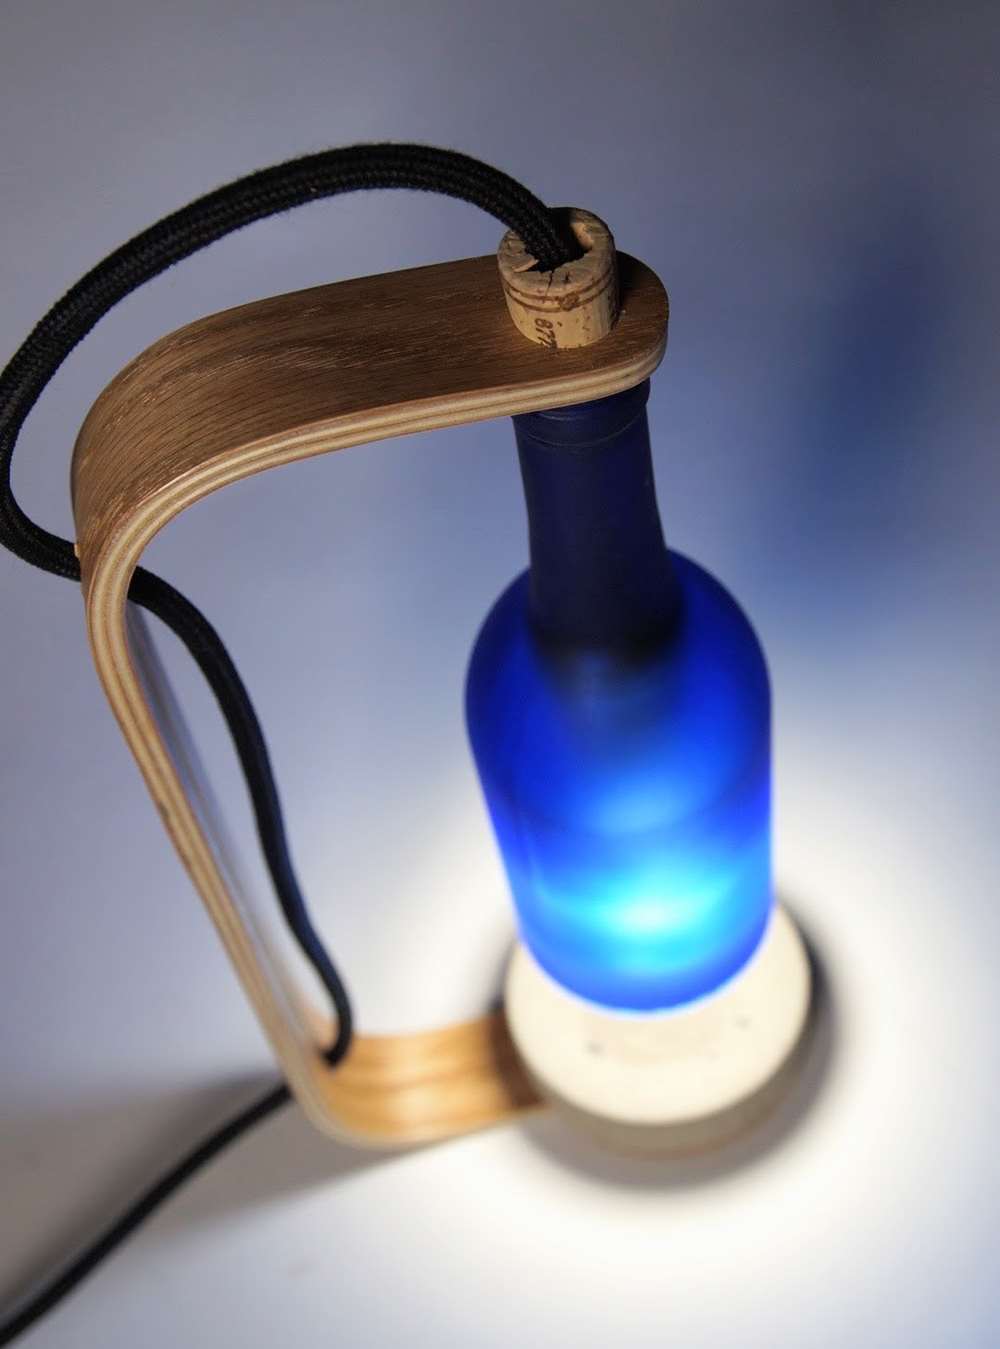 Bent Plywood and Wine Bottle Lamp by Adam Hecht